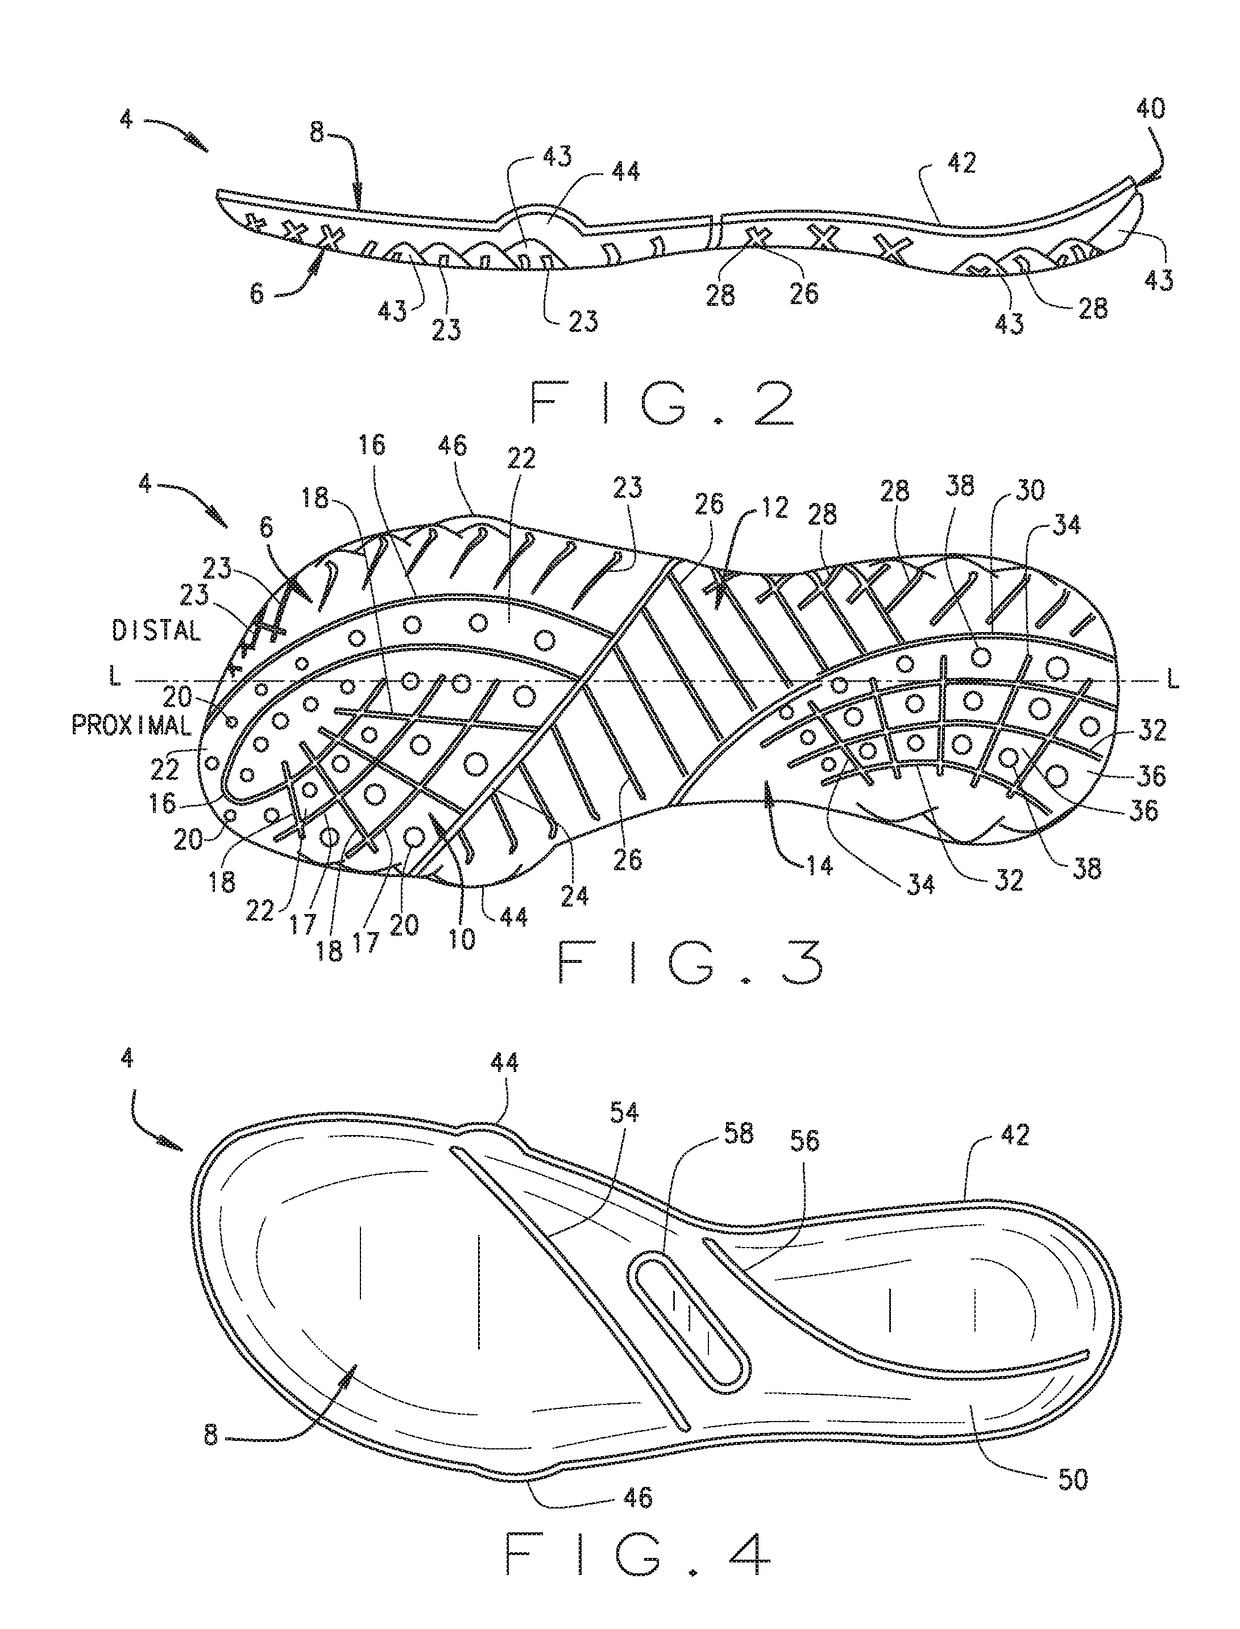 Three layer shoe construction with improved cushioning, breathability, flexibility and water displacement